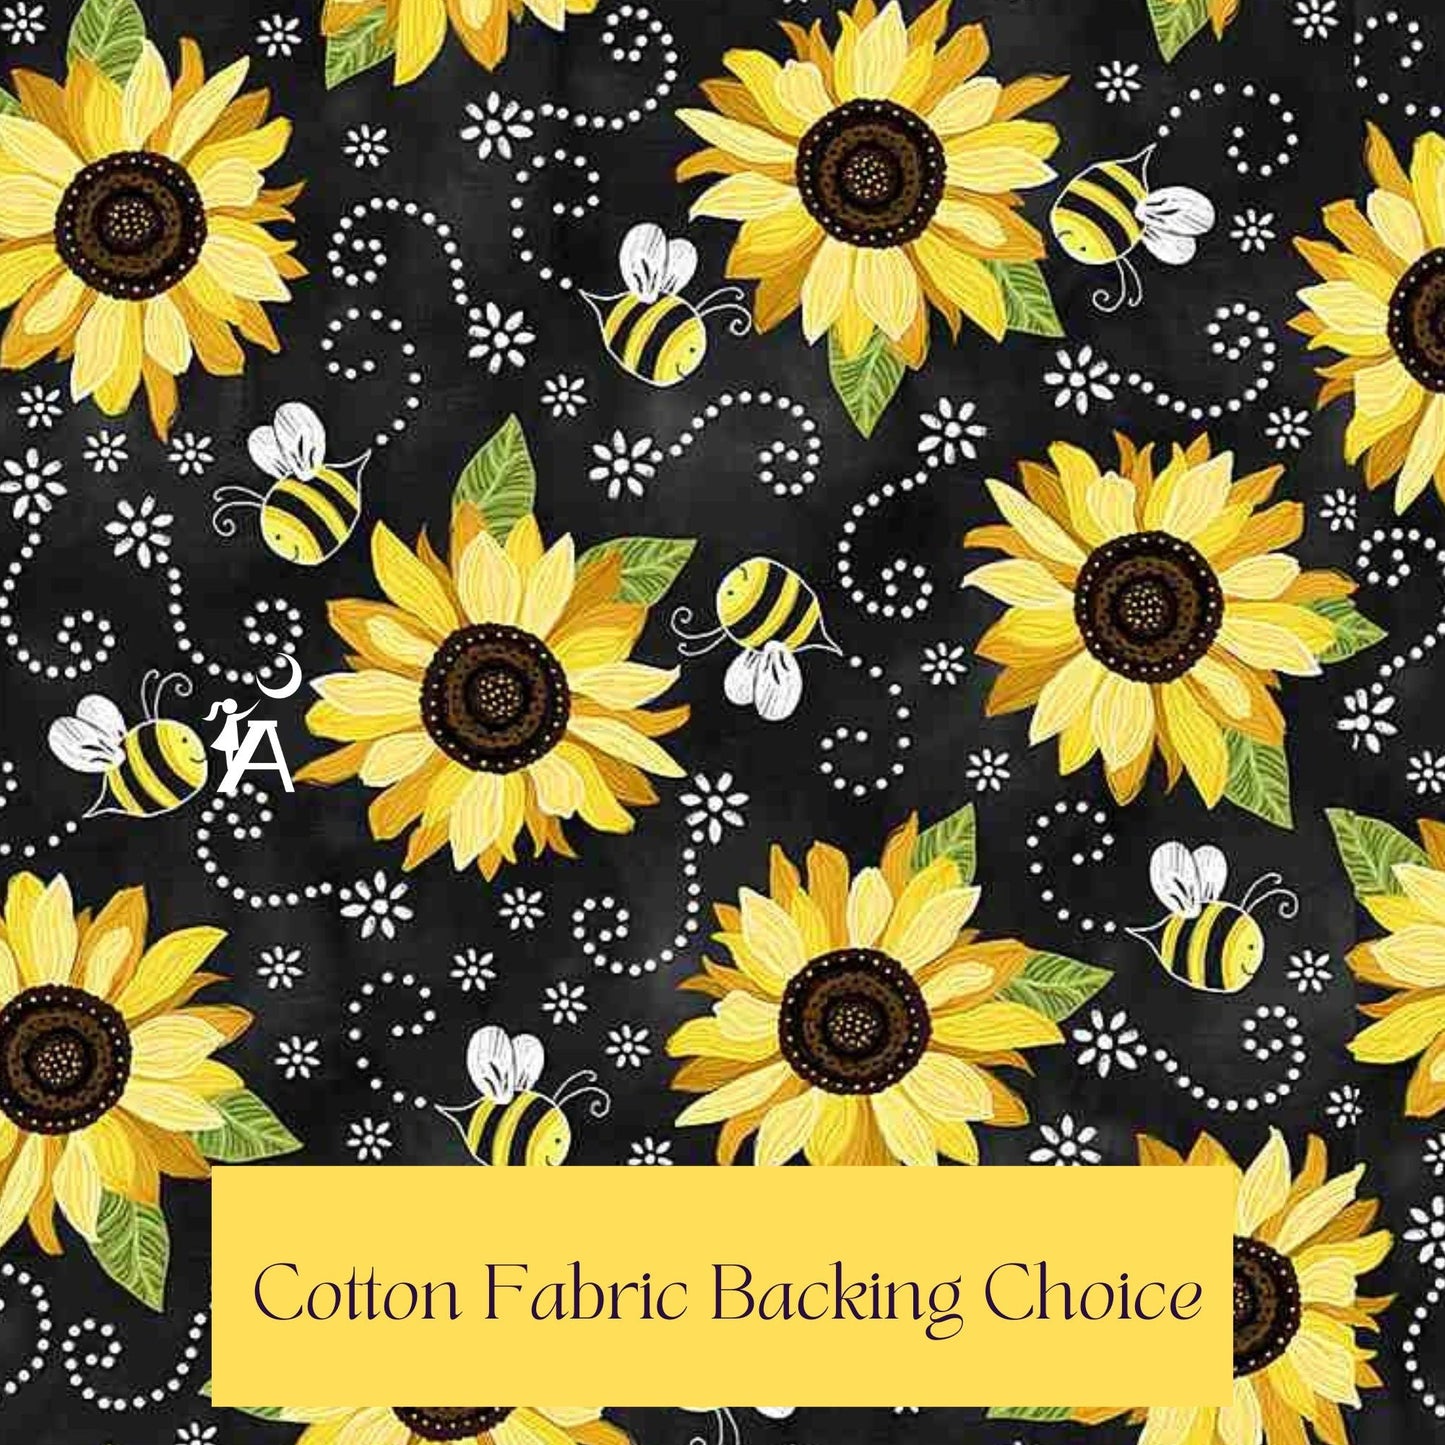 Timeless Treasures Quilt Kit Kit w/cottonBk-sunfl UPGRADE from BUNDLE to QUILT KIT for You are my Sunshine Beginner Picture This Pattern & Additional Fabric needed to complete QUILT top & binding